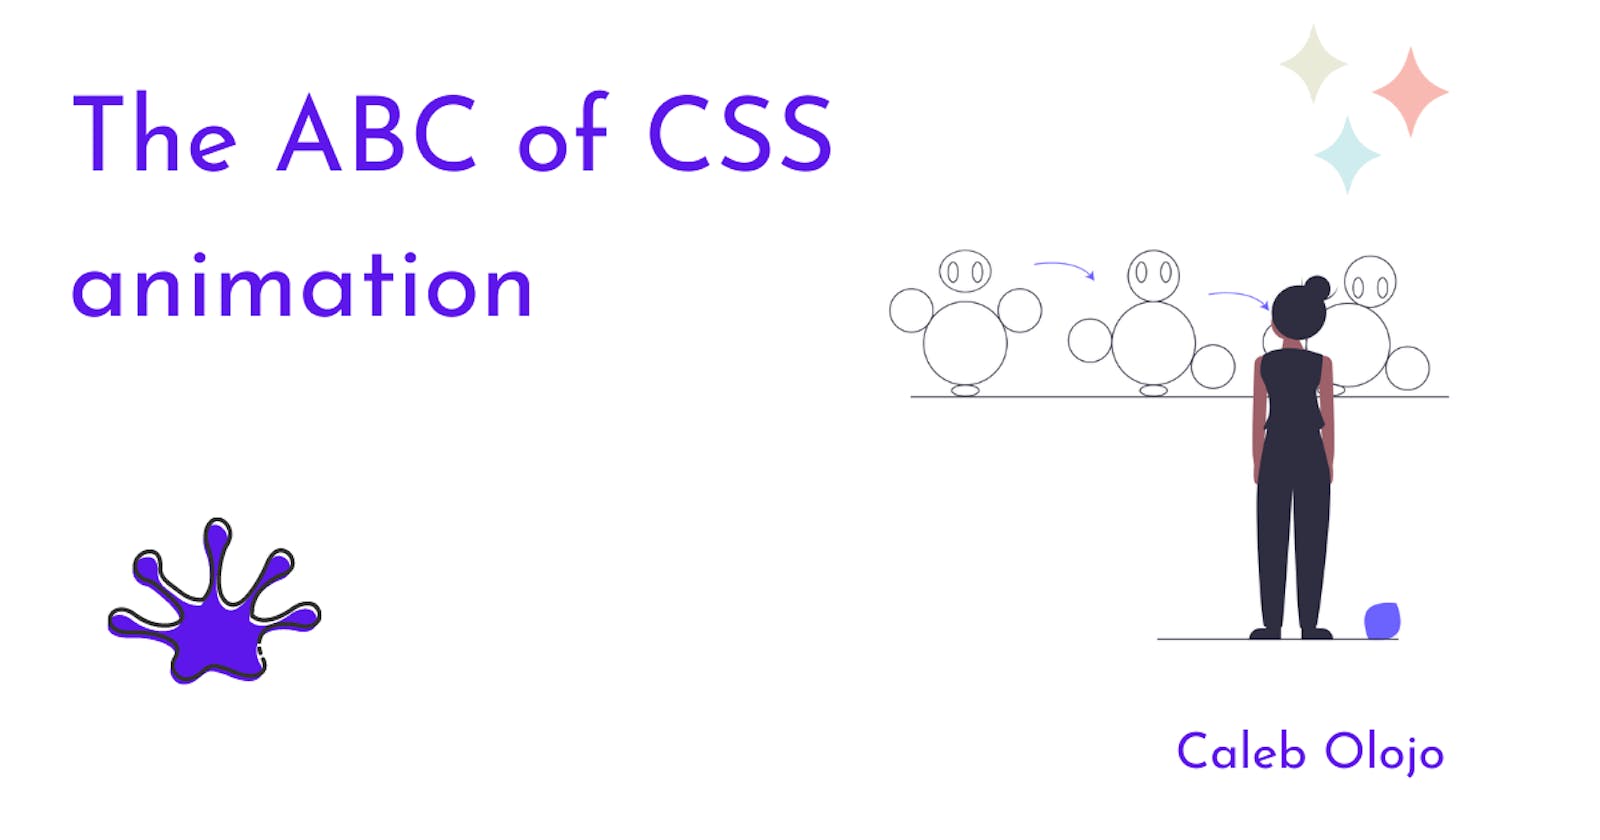 The "ABC" of CSS animation